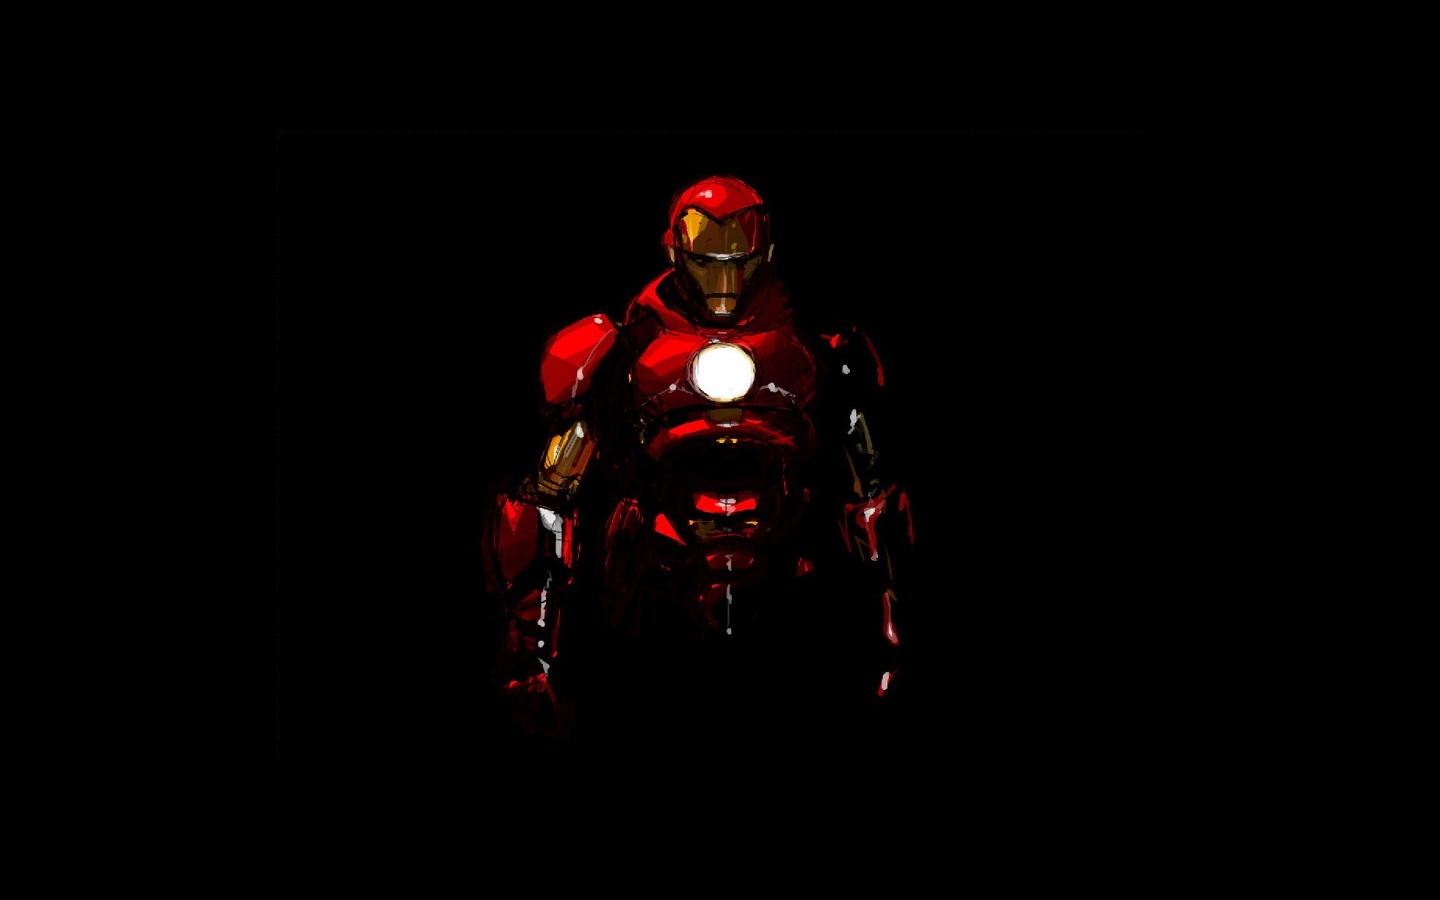 EVERY THING HD WALLPAPERS: Iron Man HD Wallpapers 2013